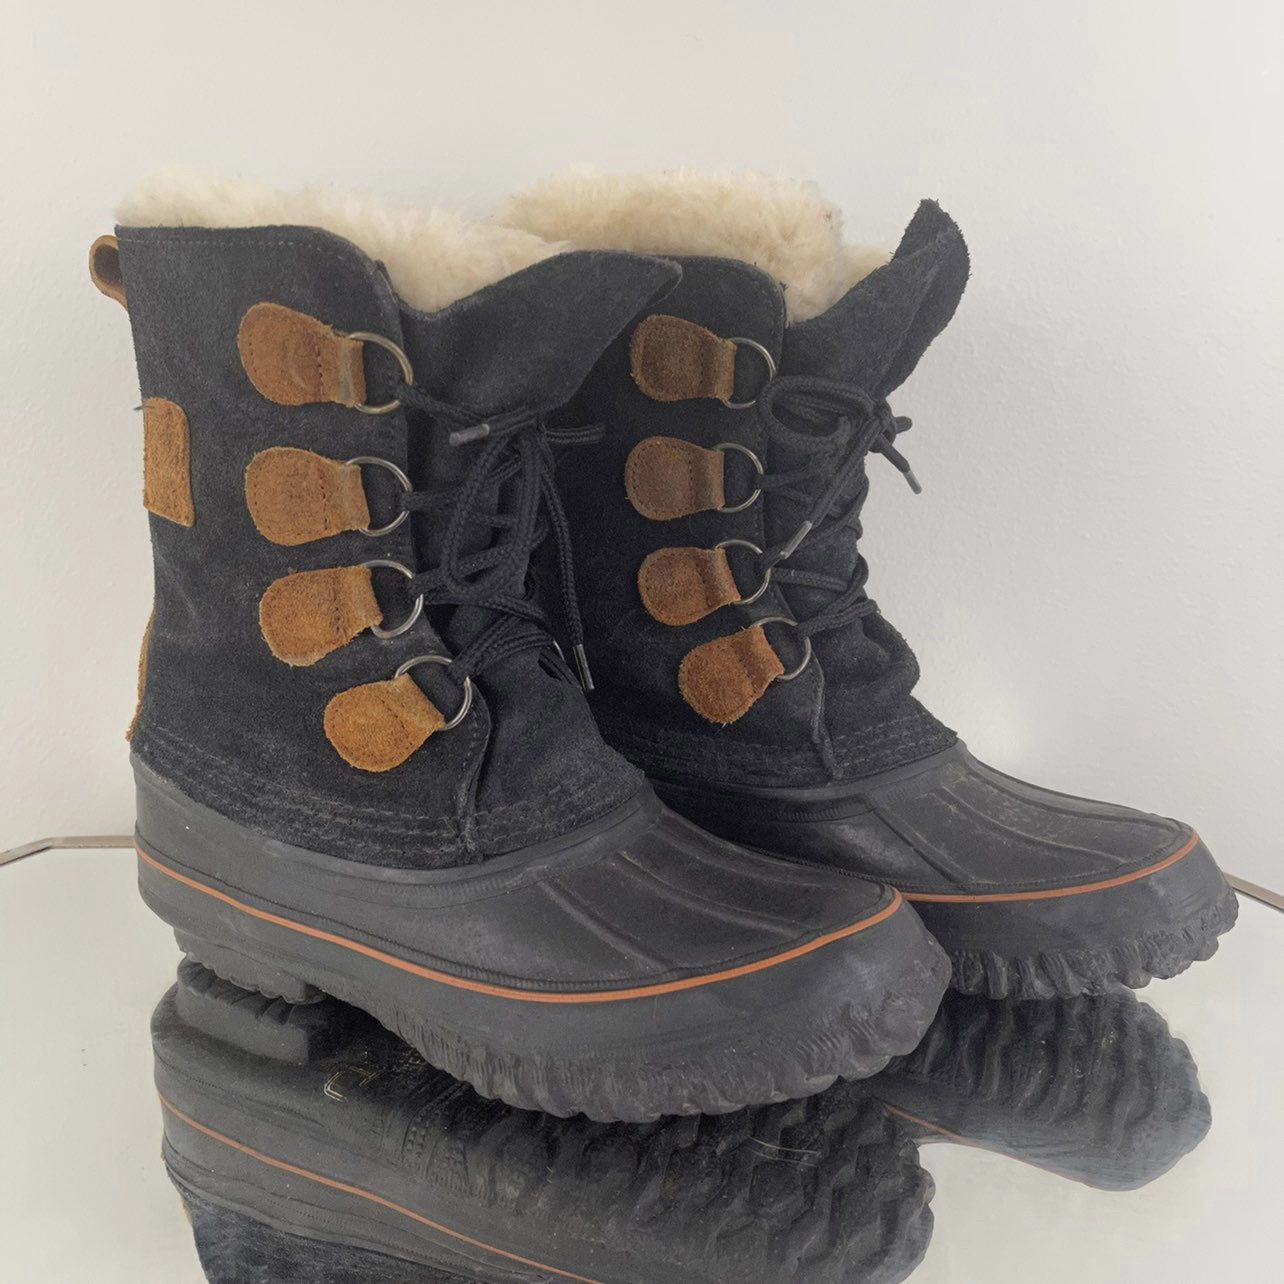 LACROSSE Black Brown Leather Felt Lined Lace Up Mid Calf Waterproof Winter Boots